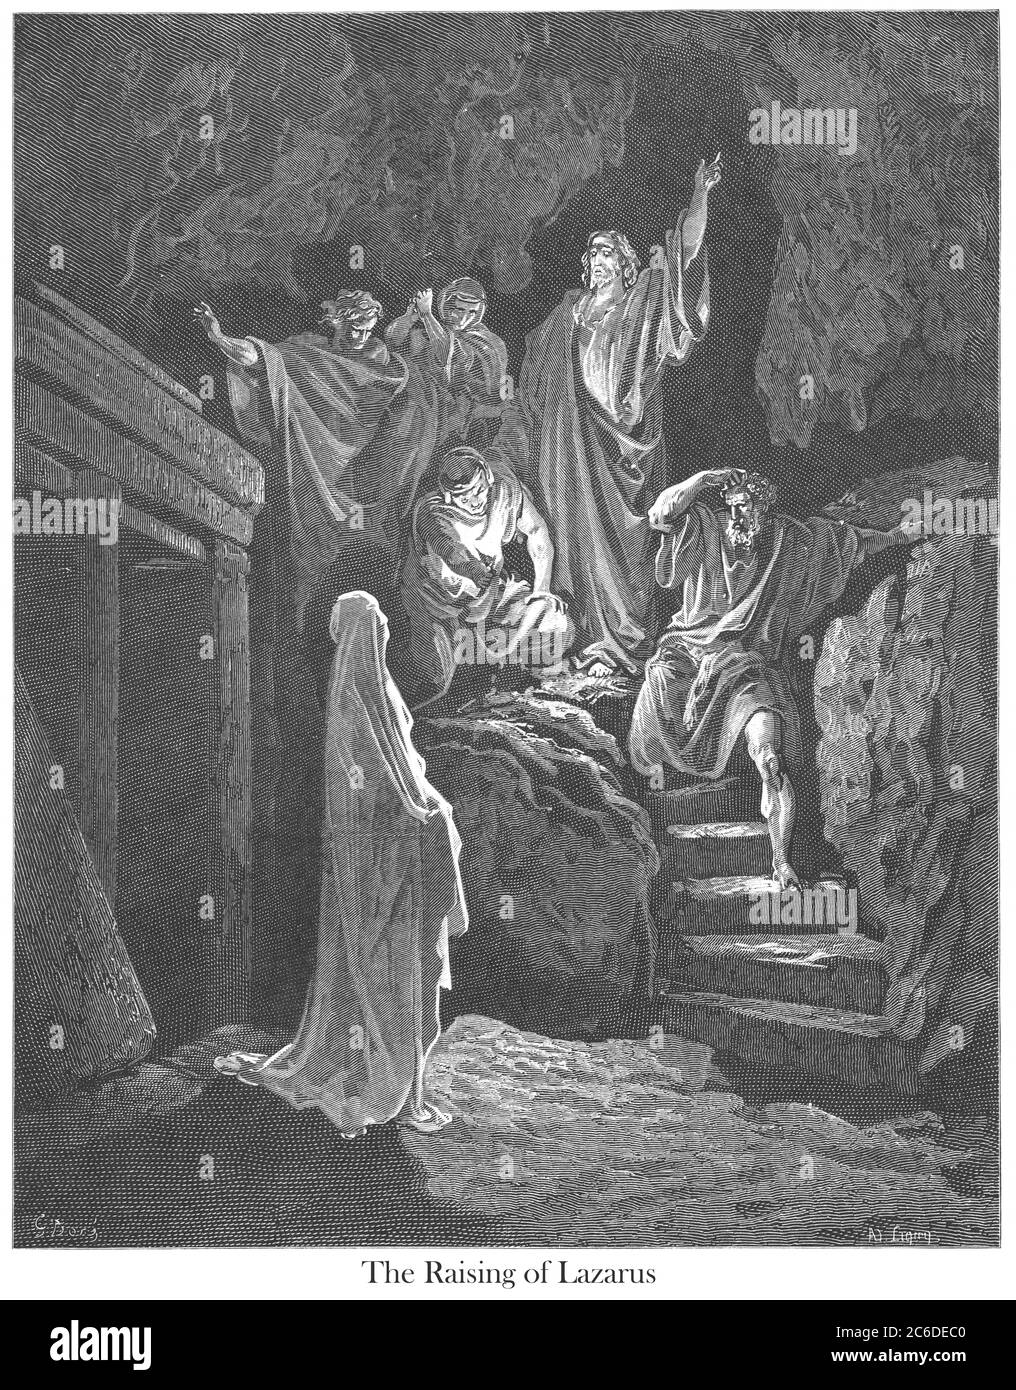 Resurrection of Lazarus [John 11:41-43] From the book 'Bible Gallery' Illustrated by Gustave Dore with Memoir of Dore and Descriptive Letter-press by Talbot W. Chambers D.D. Published by Cassell & Company Limited in London and simultaneously by Mame in Tours, France in 1866 Stock Photo